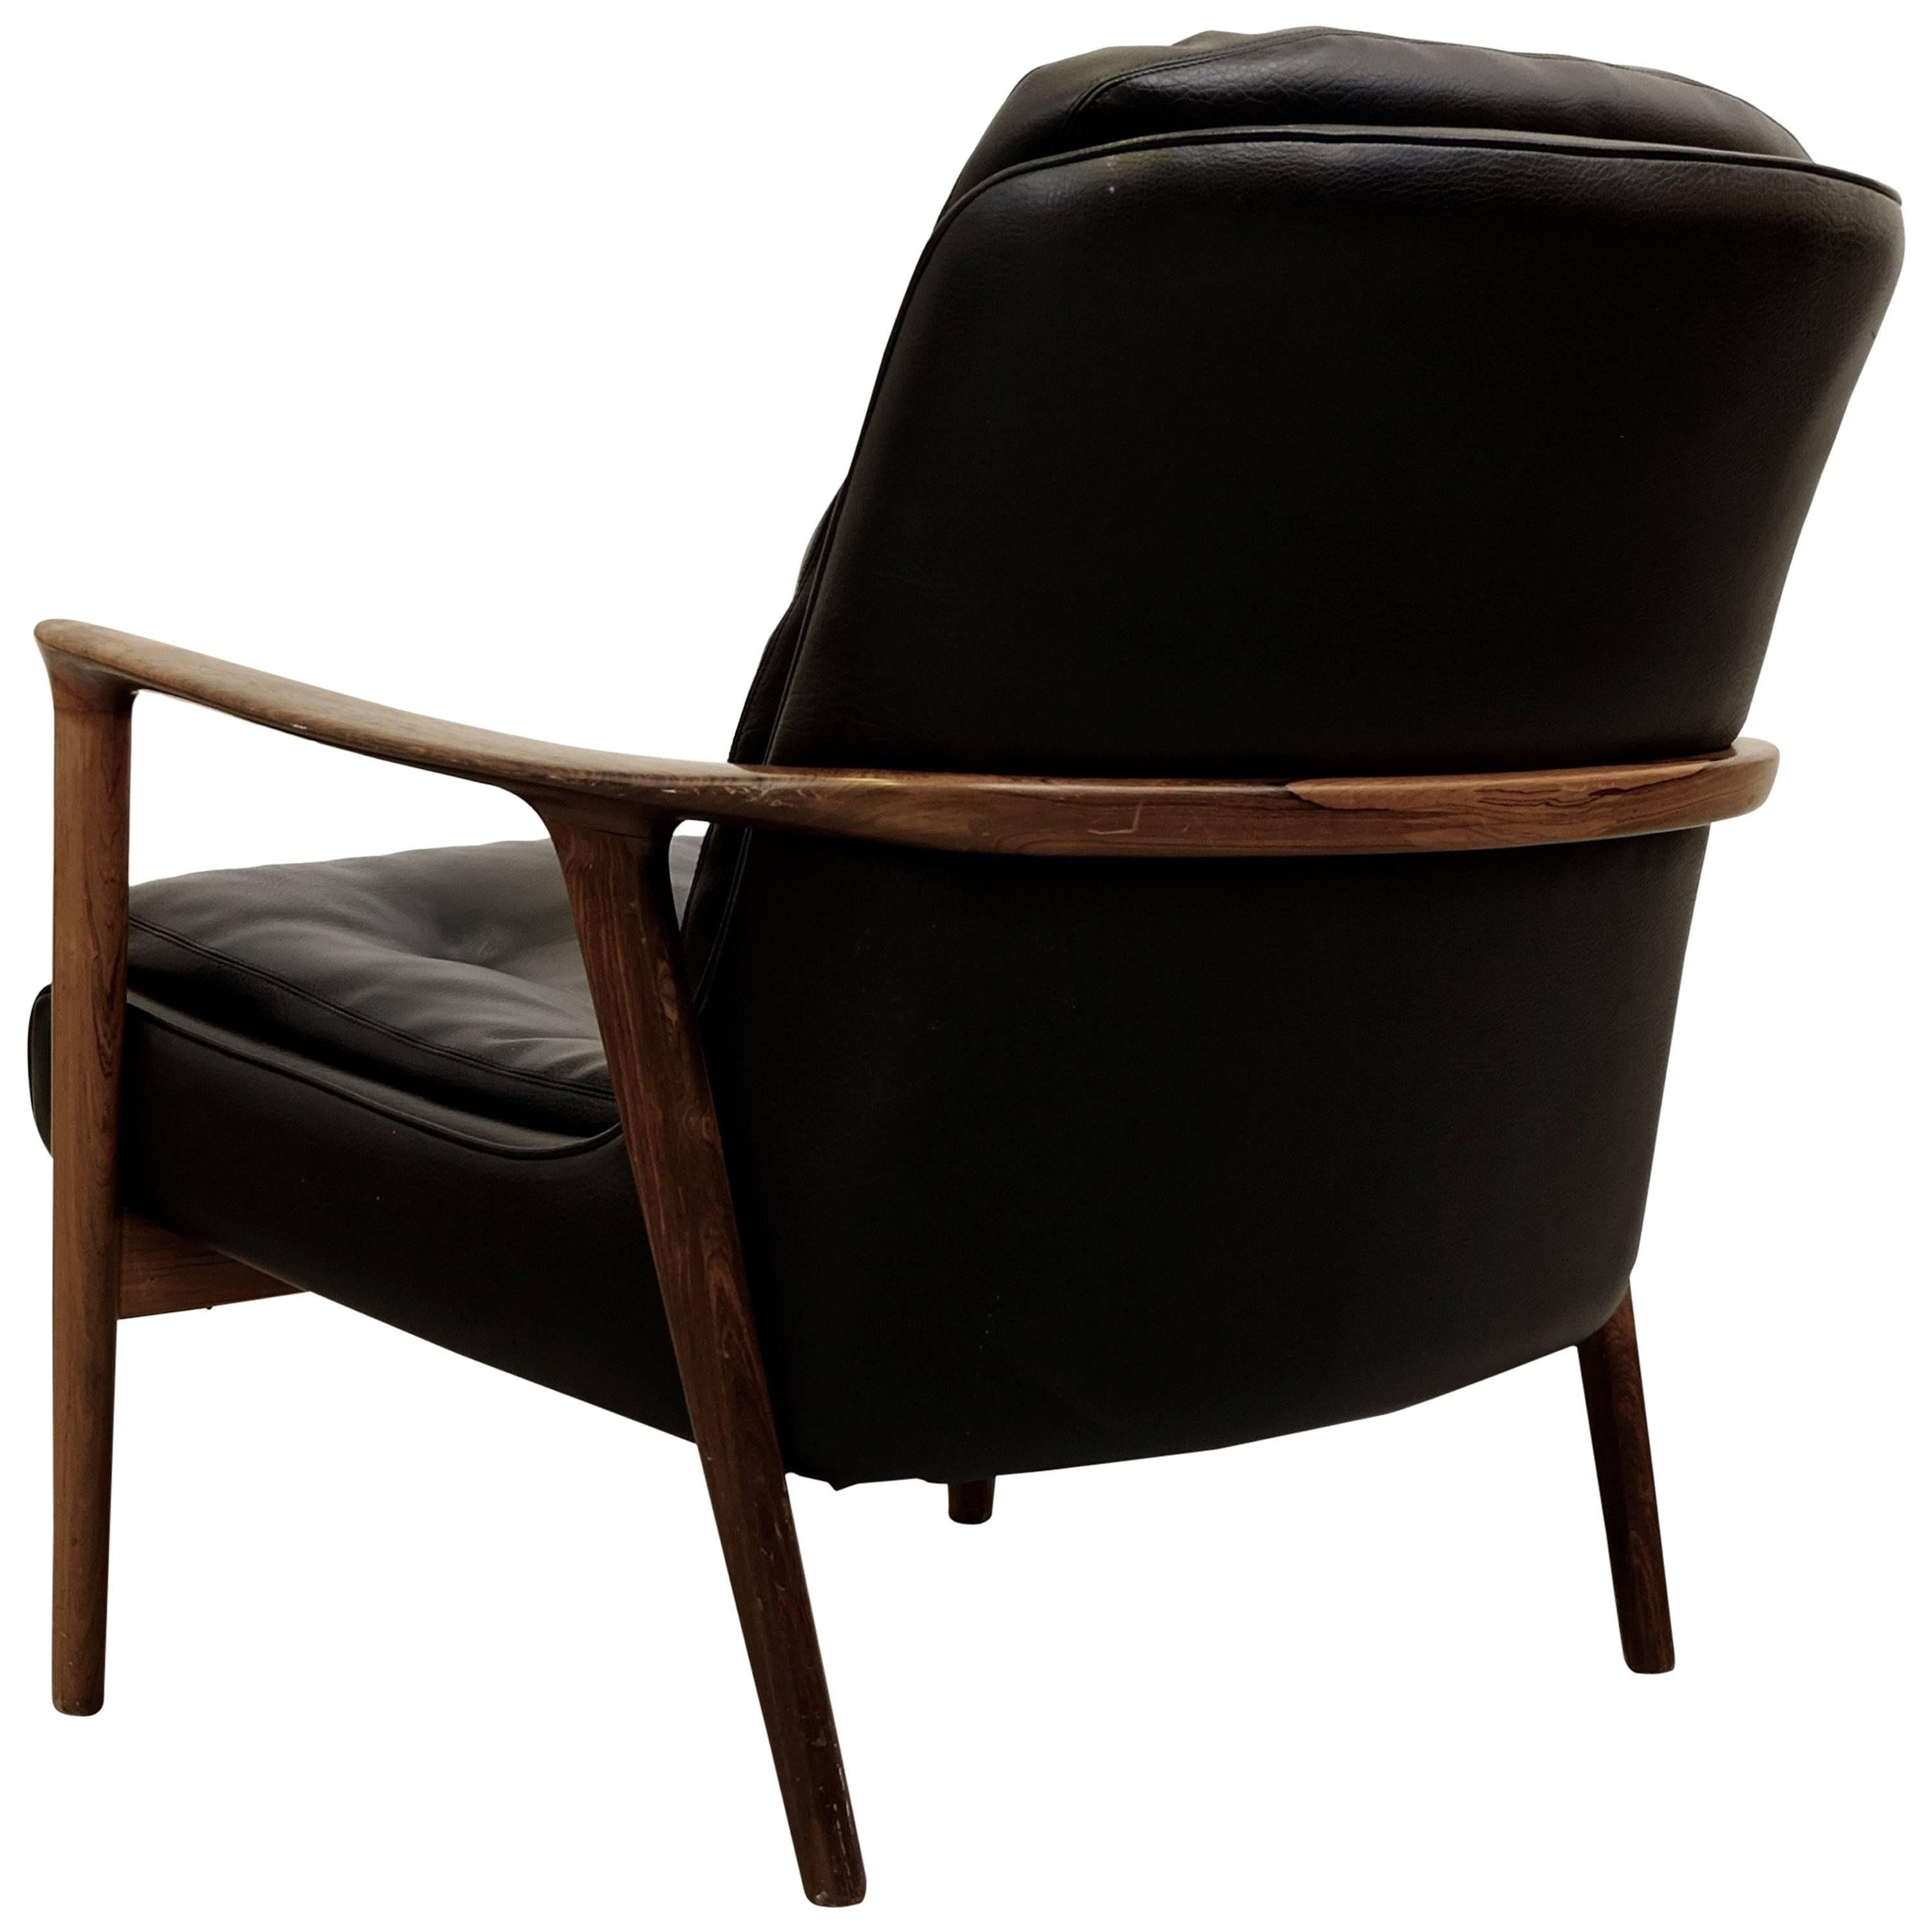 Rosewood and Black Leather Armchair "Tunis" by Inge Andersson, 1960s